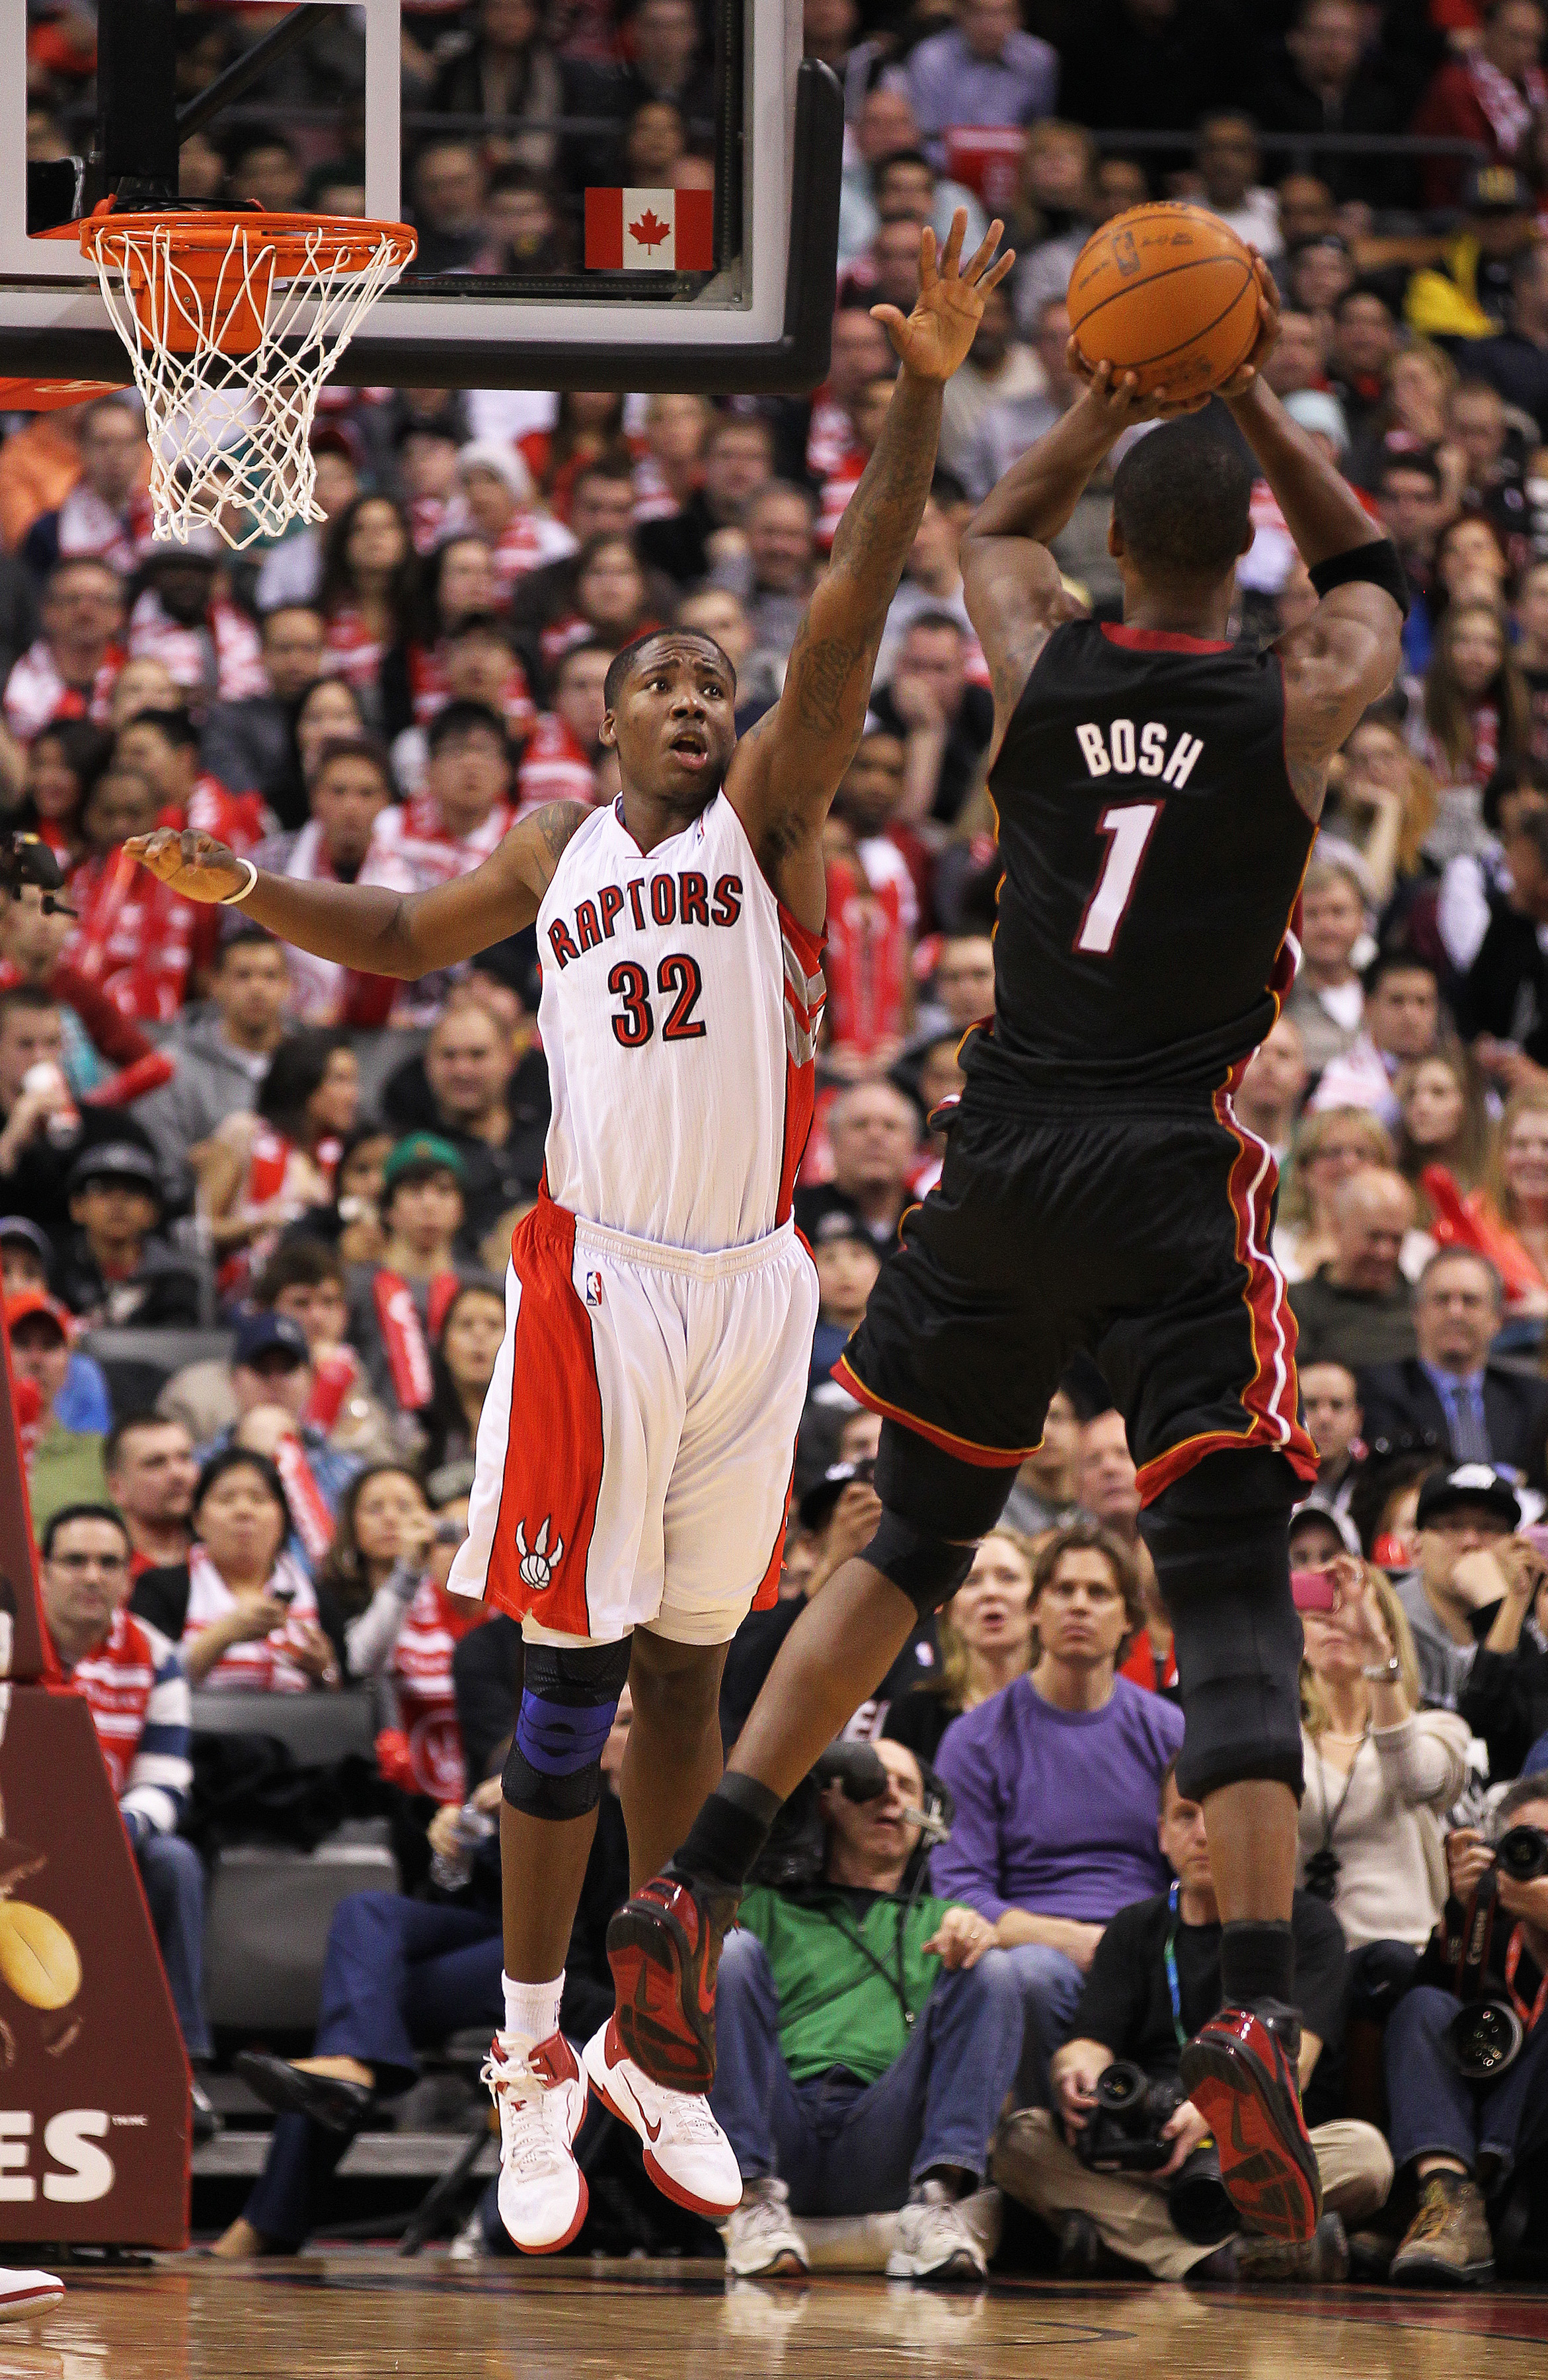 TORONTO, CAN - FEBRUARY 16:  Chris Bosh #1 of the Miami Heat shoots against  Ed Davis #32 of the Toronto Raptors in a game on February 16, 2011 at the Air Canada Centre in Toronto, Canada. The Heat defeated the Raptors 103-95. (Photo by Claus Andersen/Get